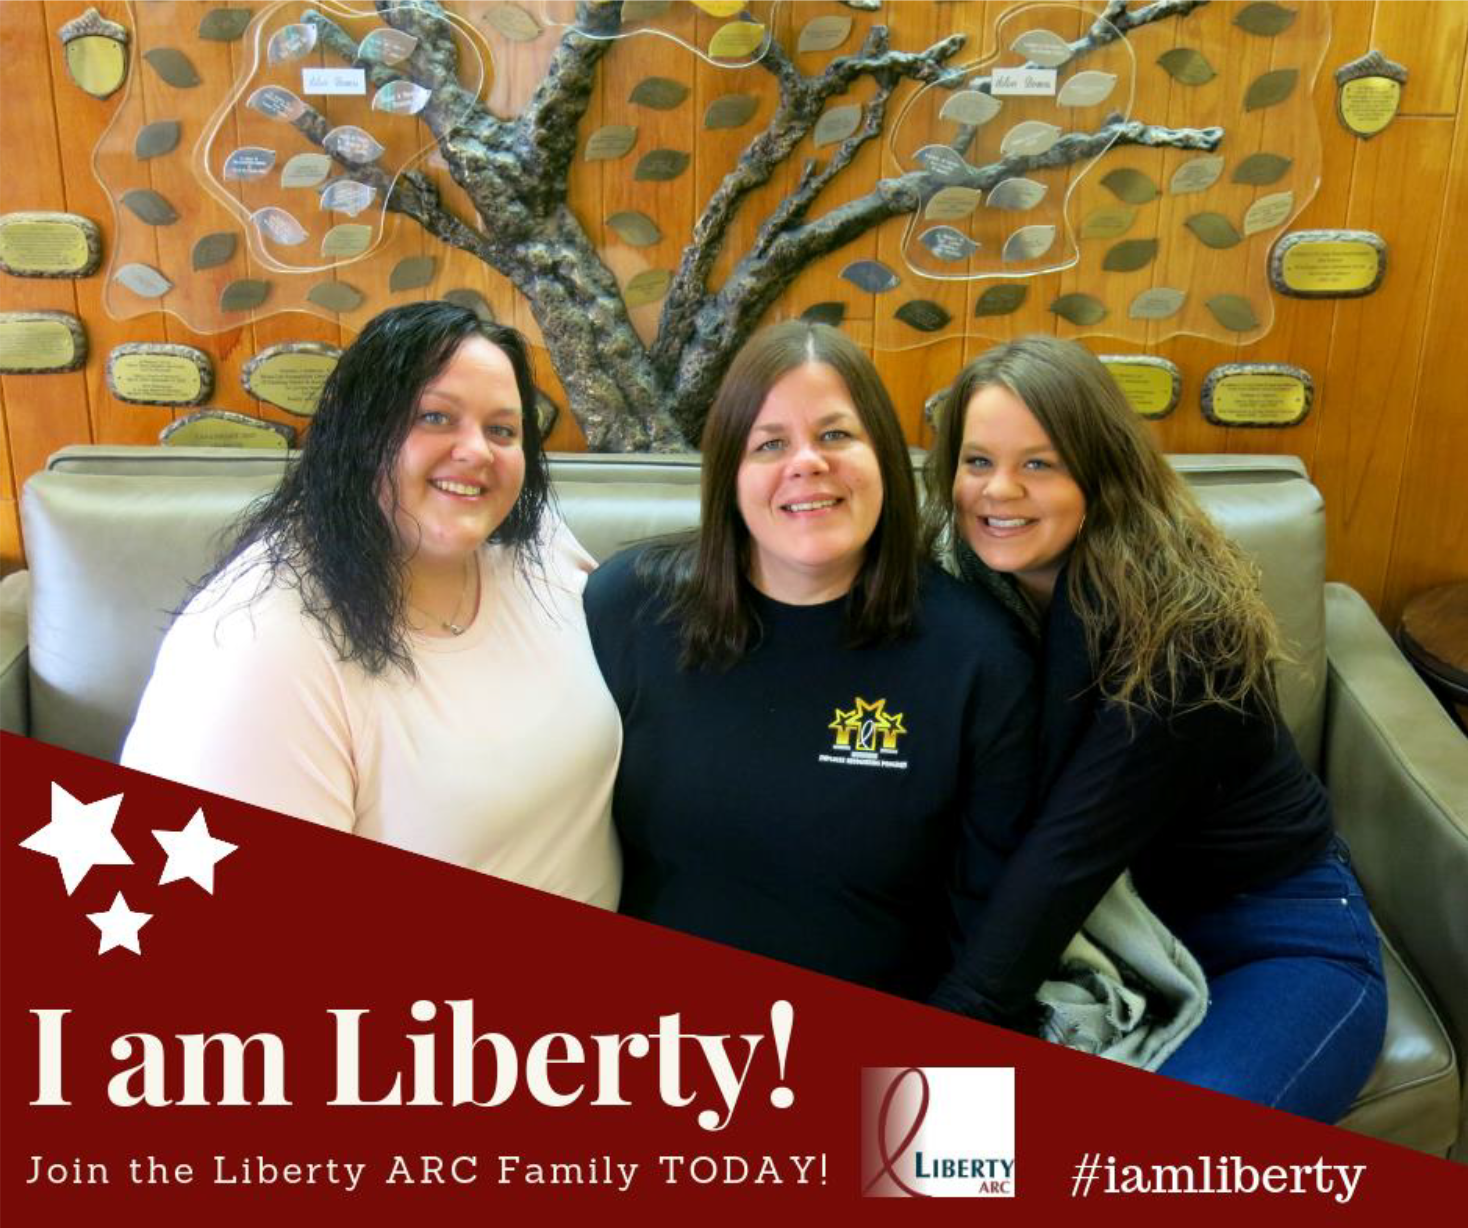 I am Liberty Story: Join the Liberty ARC Family Today. Headshot of Sheree Kretser with her daughters, Jessica Marotta and Kaitlin Kretser.